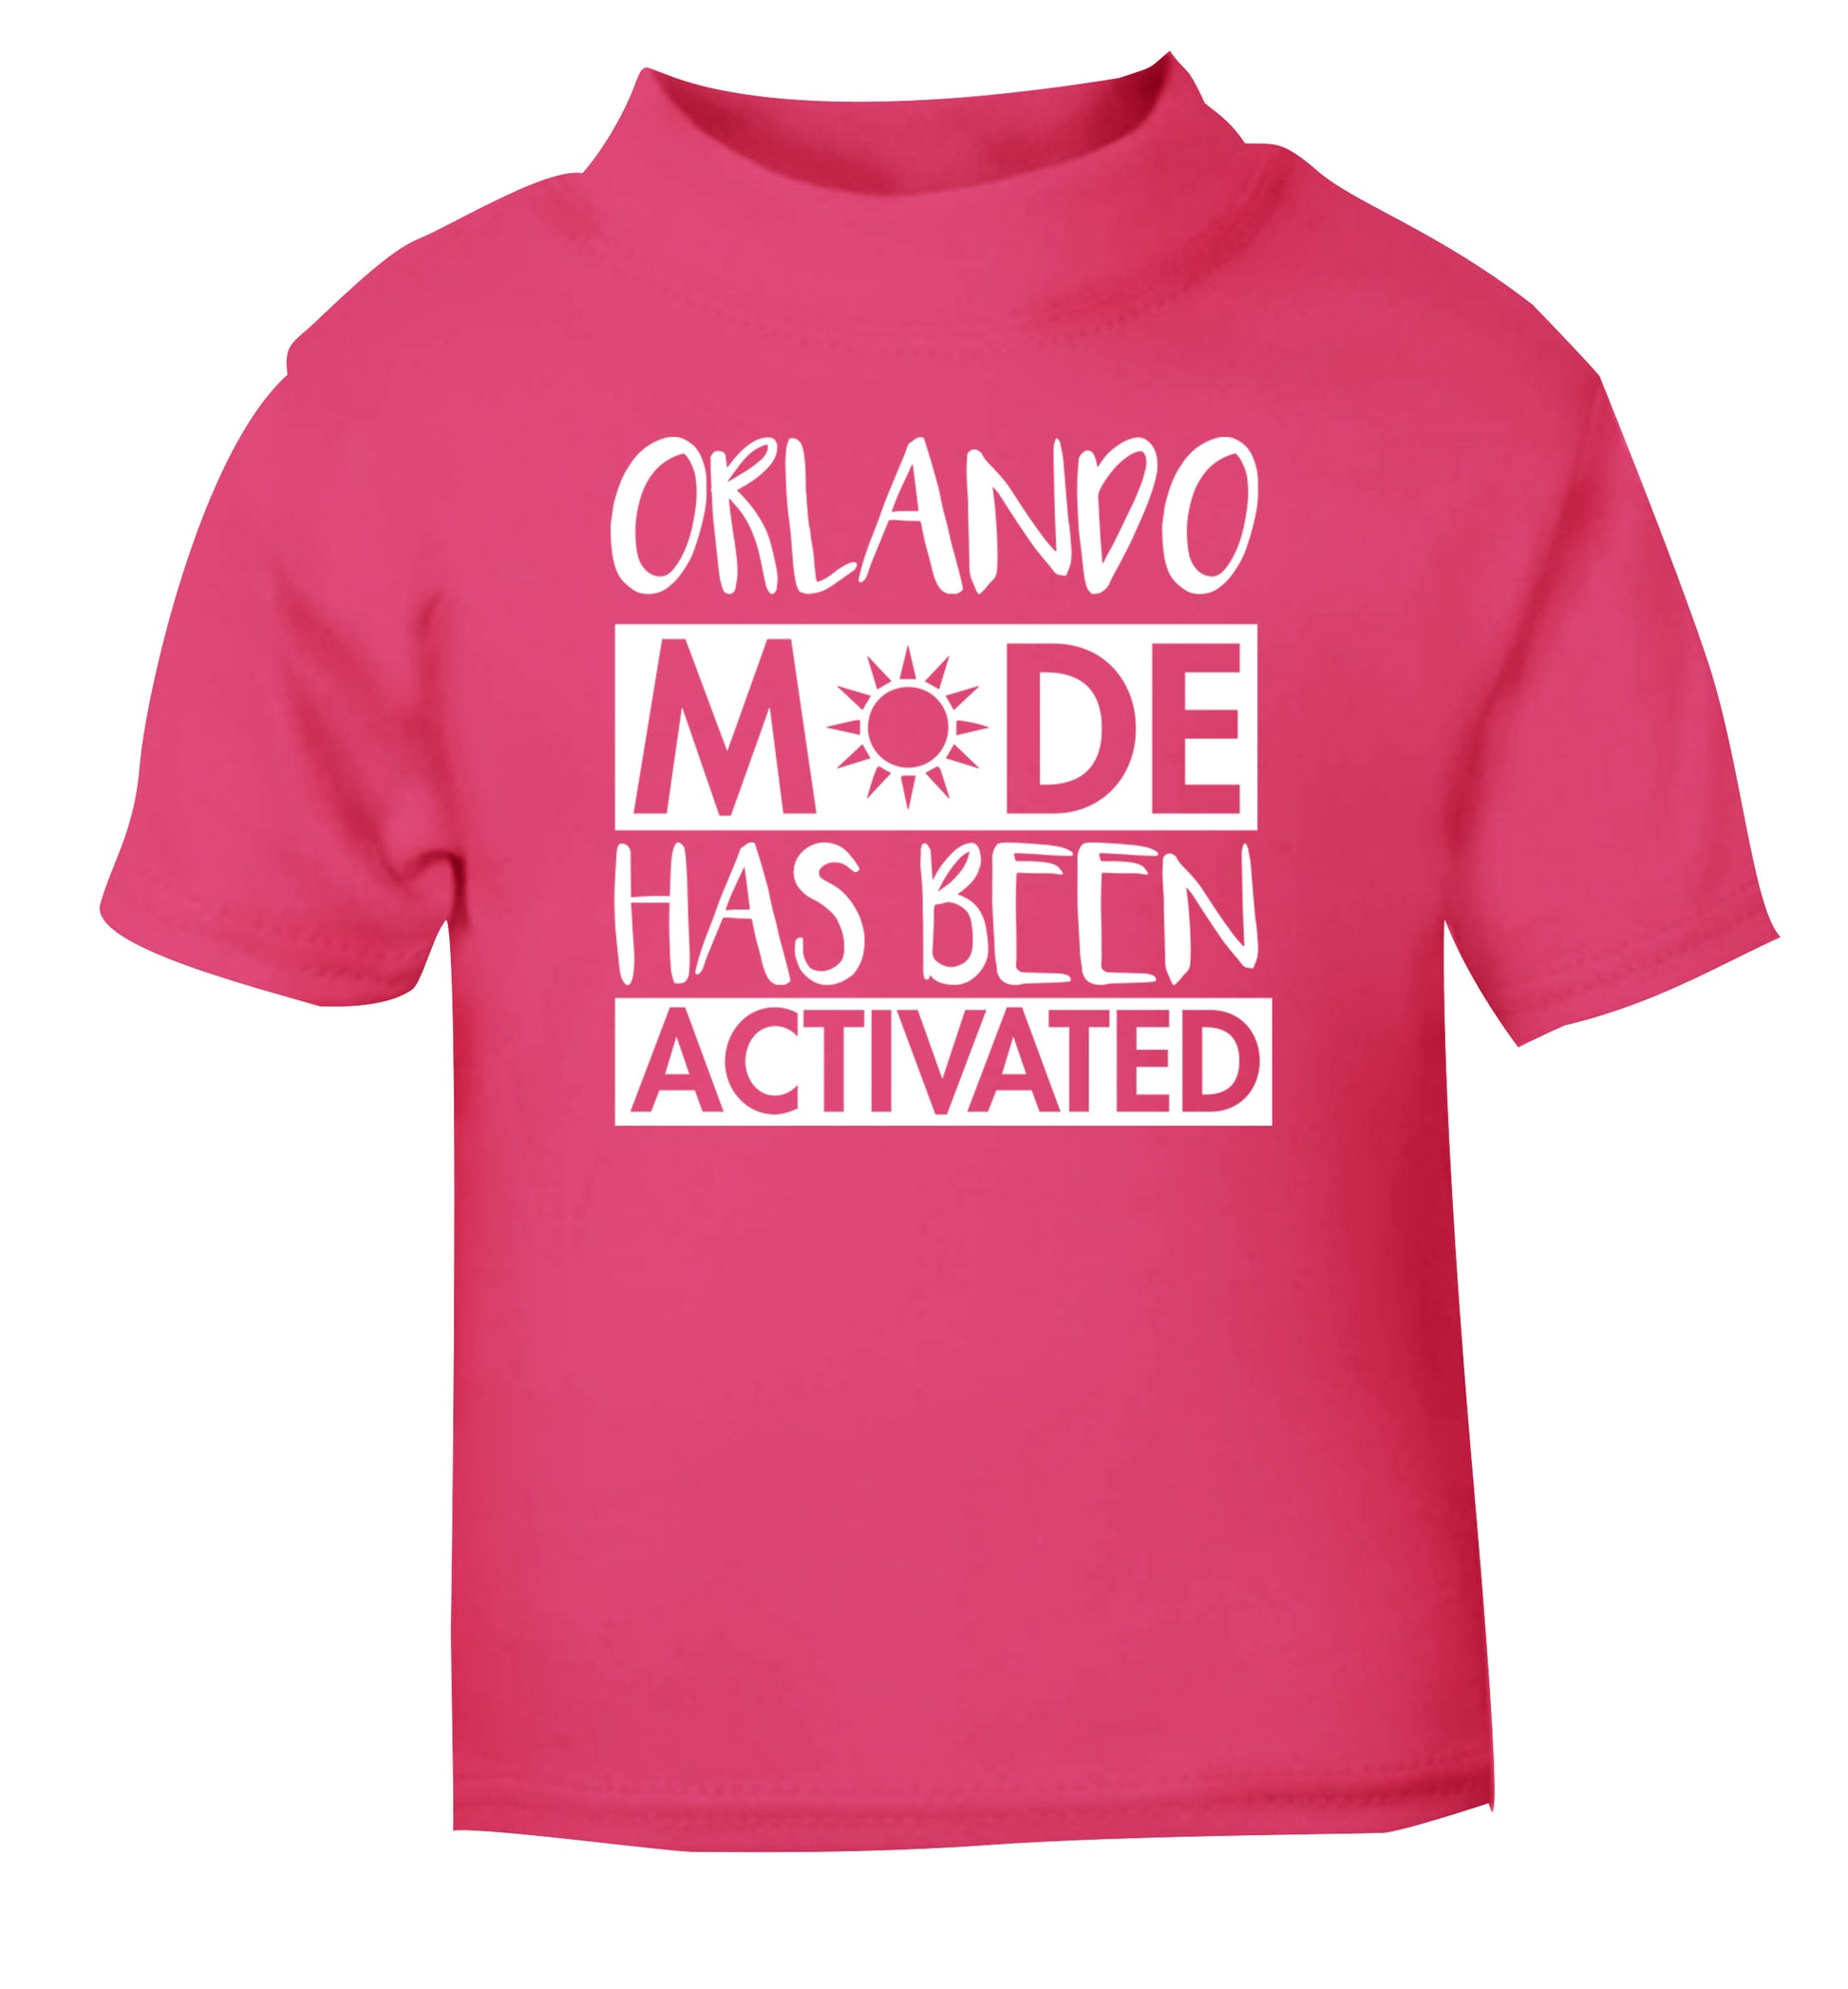 Orlando mode has been activated pink Baby Toddler Tshirt 2 Years